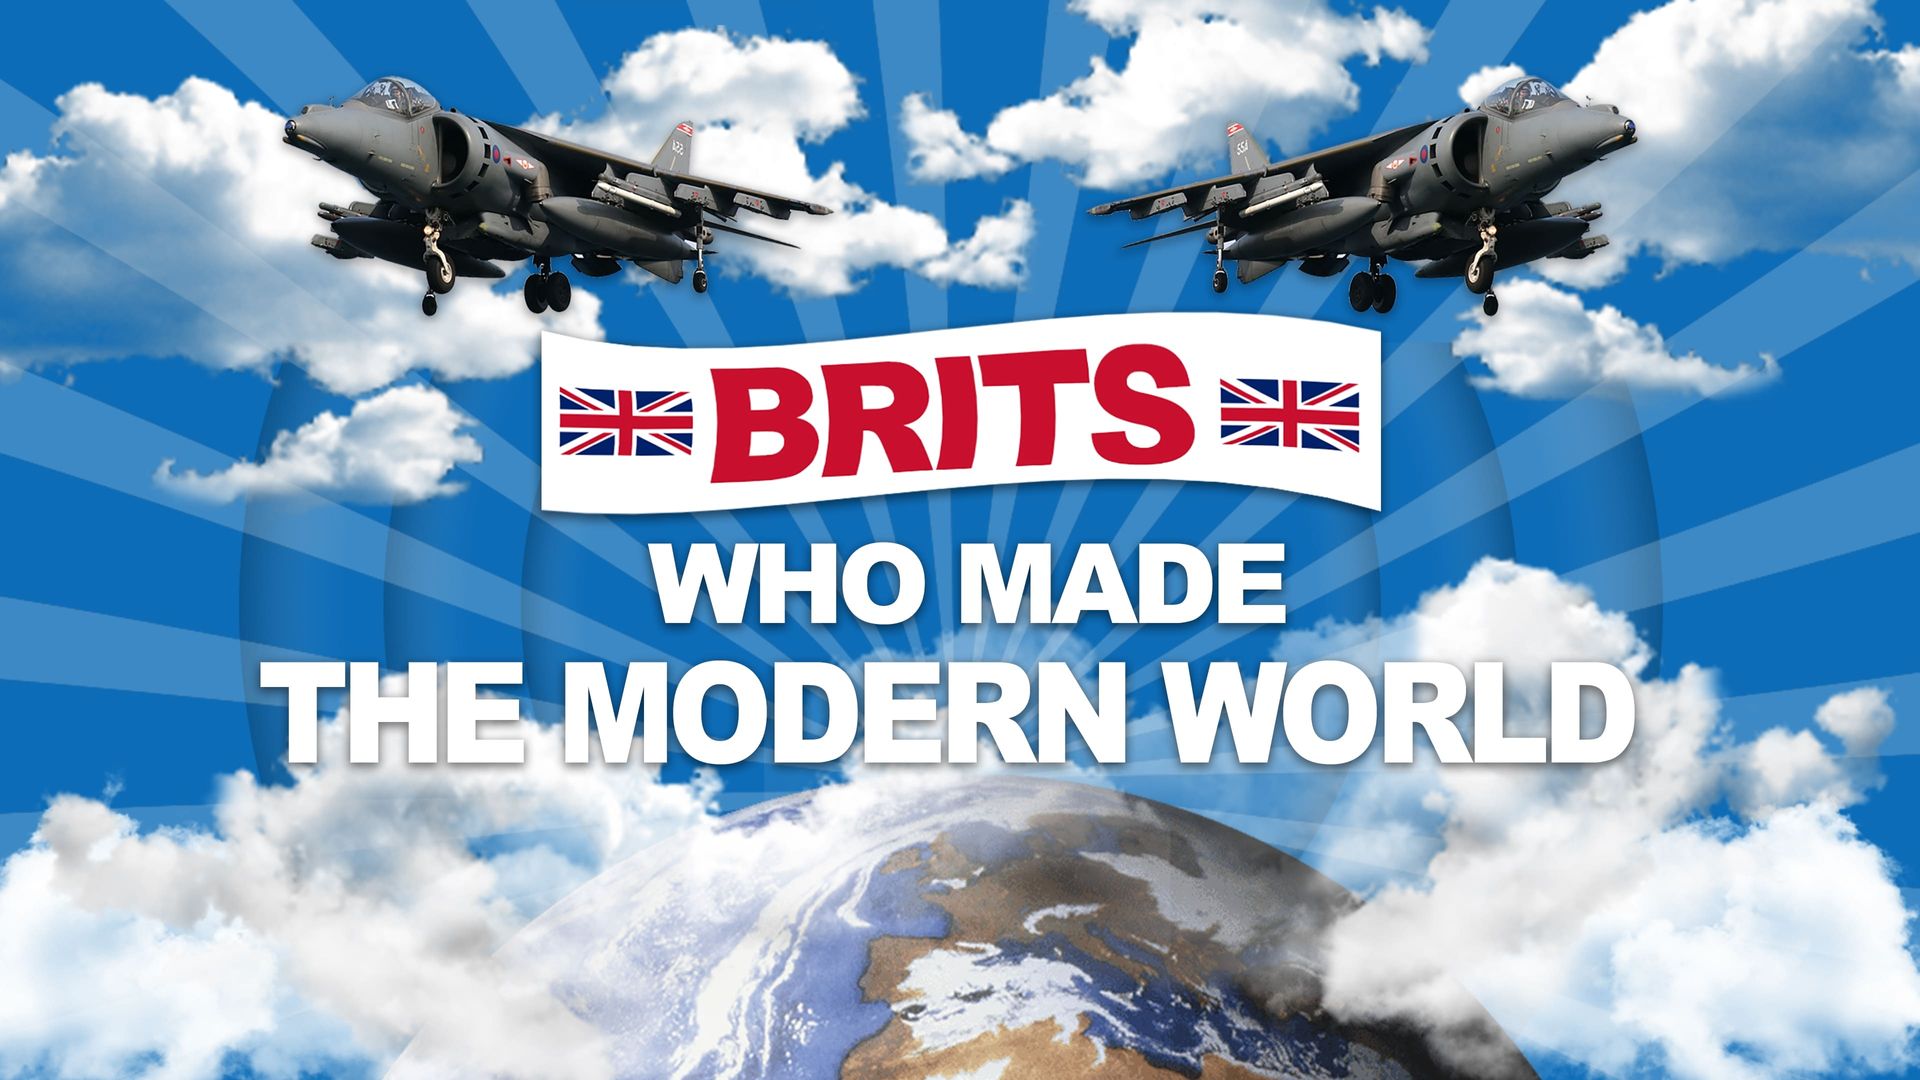 Brits Who Made the Modern World background